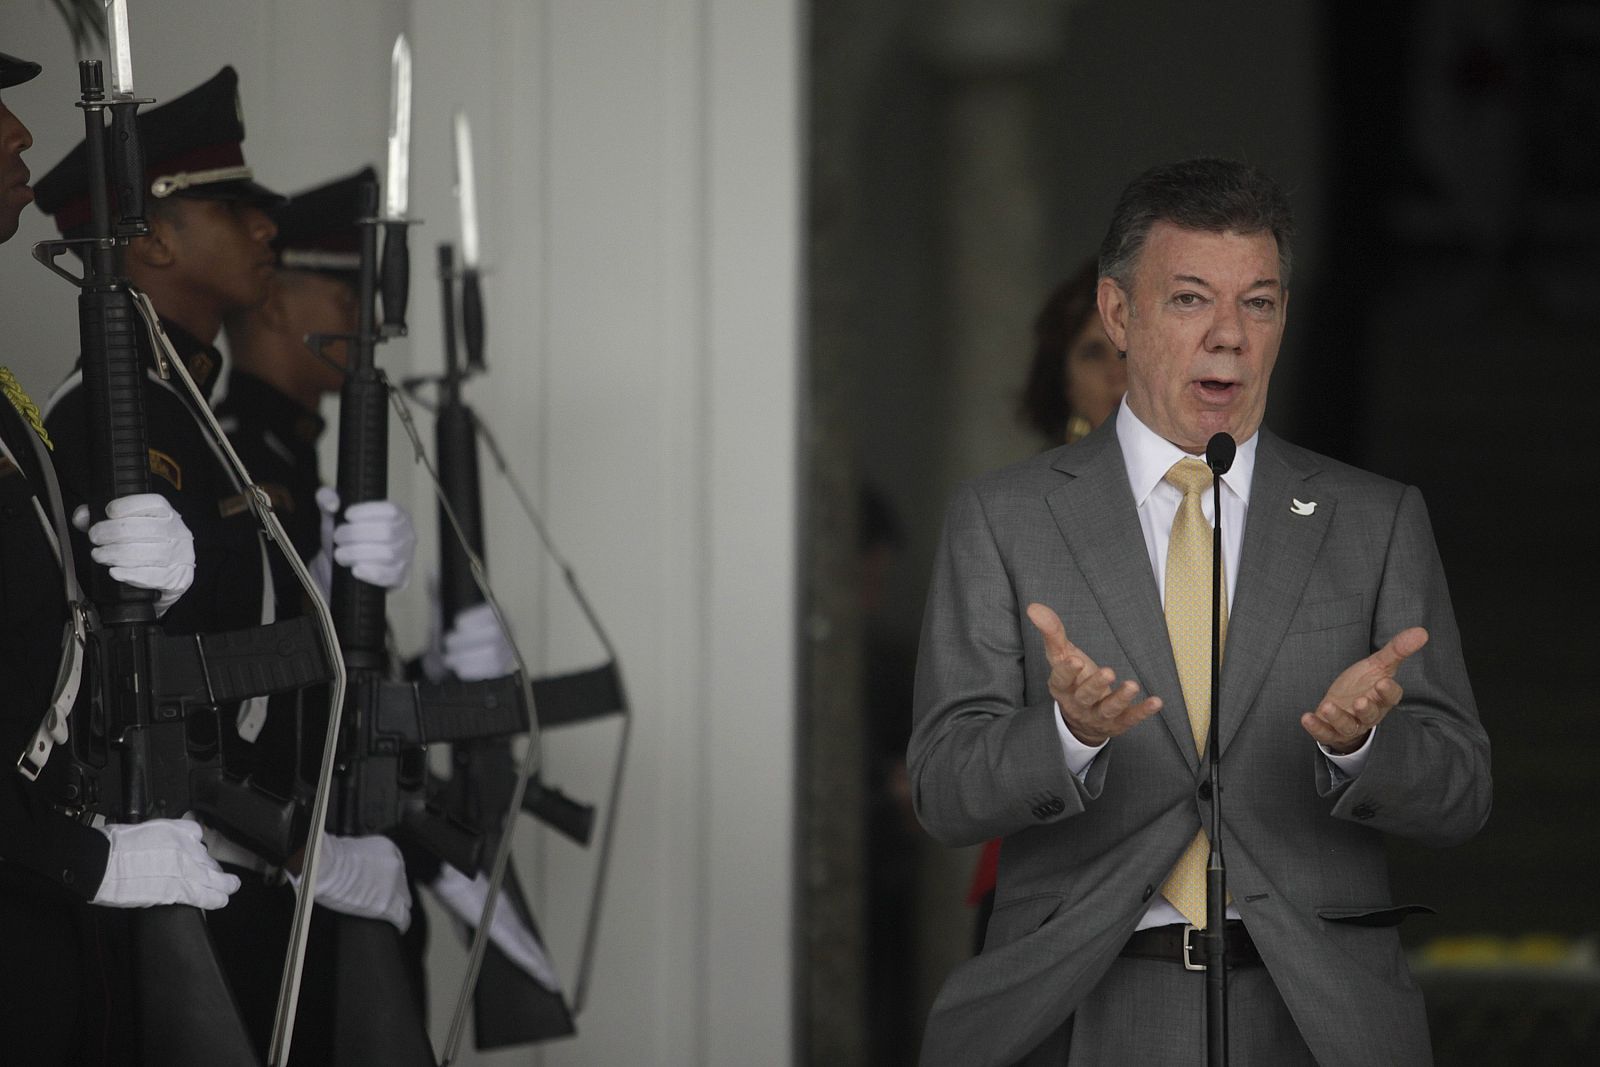 Colombia's President Santos delivers a speech after a private meeting with Panamanian President Varela at the presidential palace in Panama City